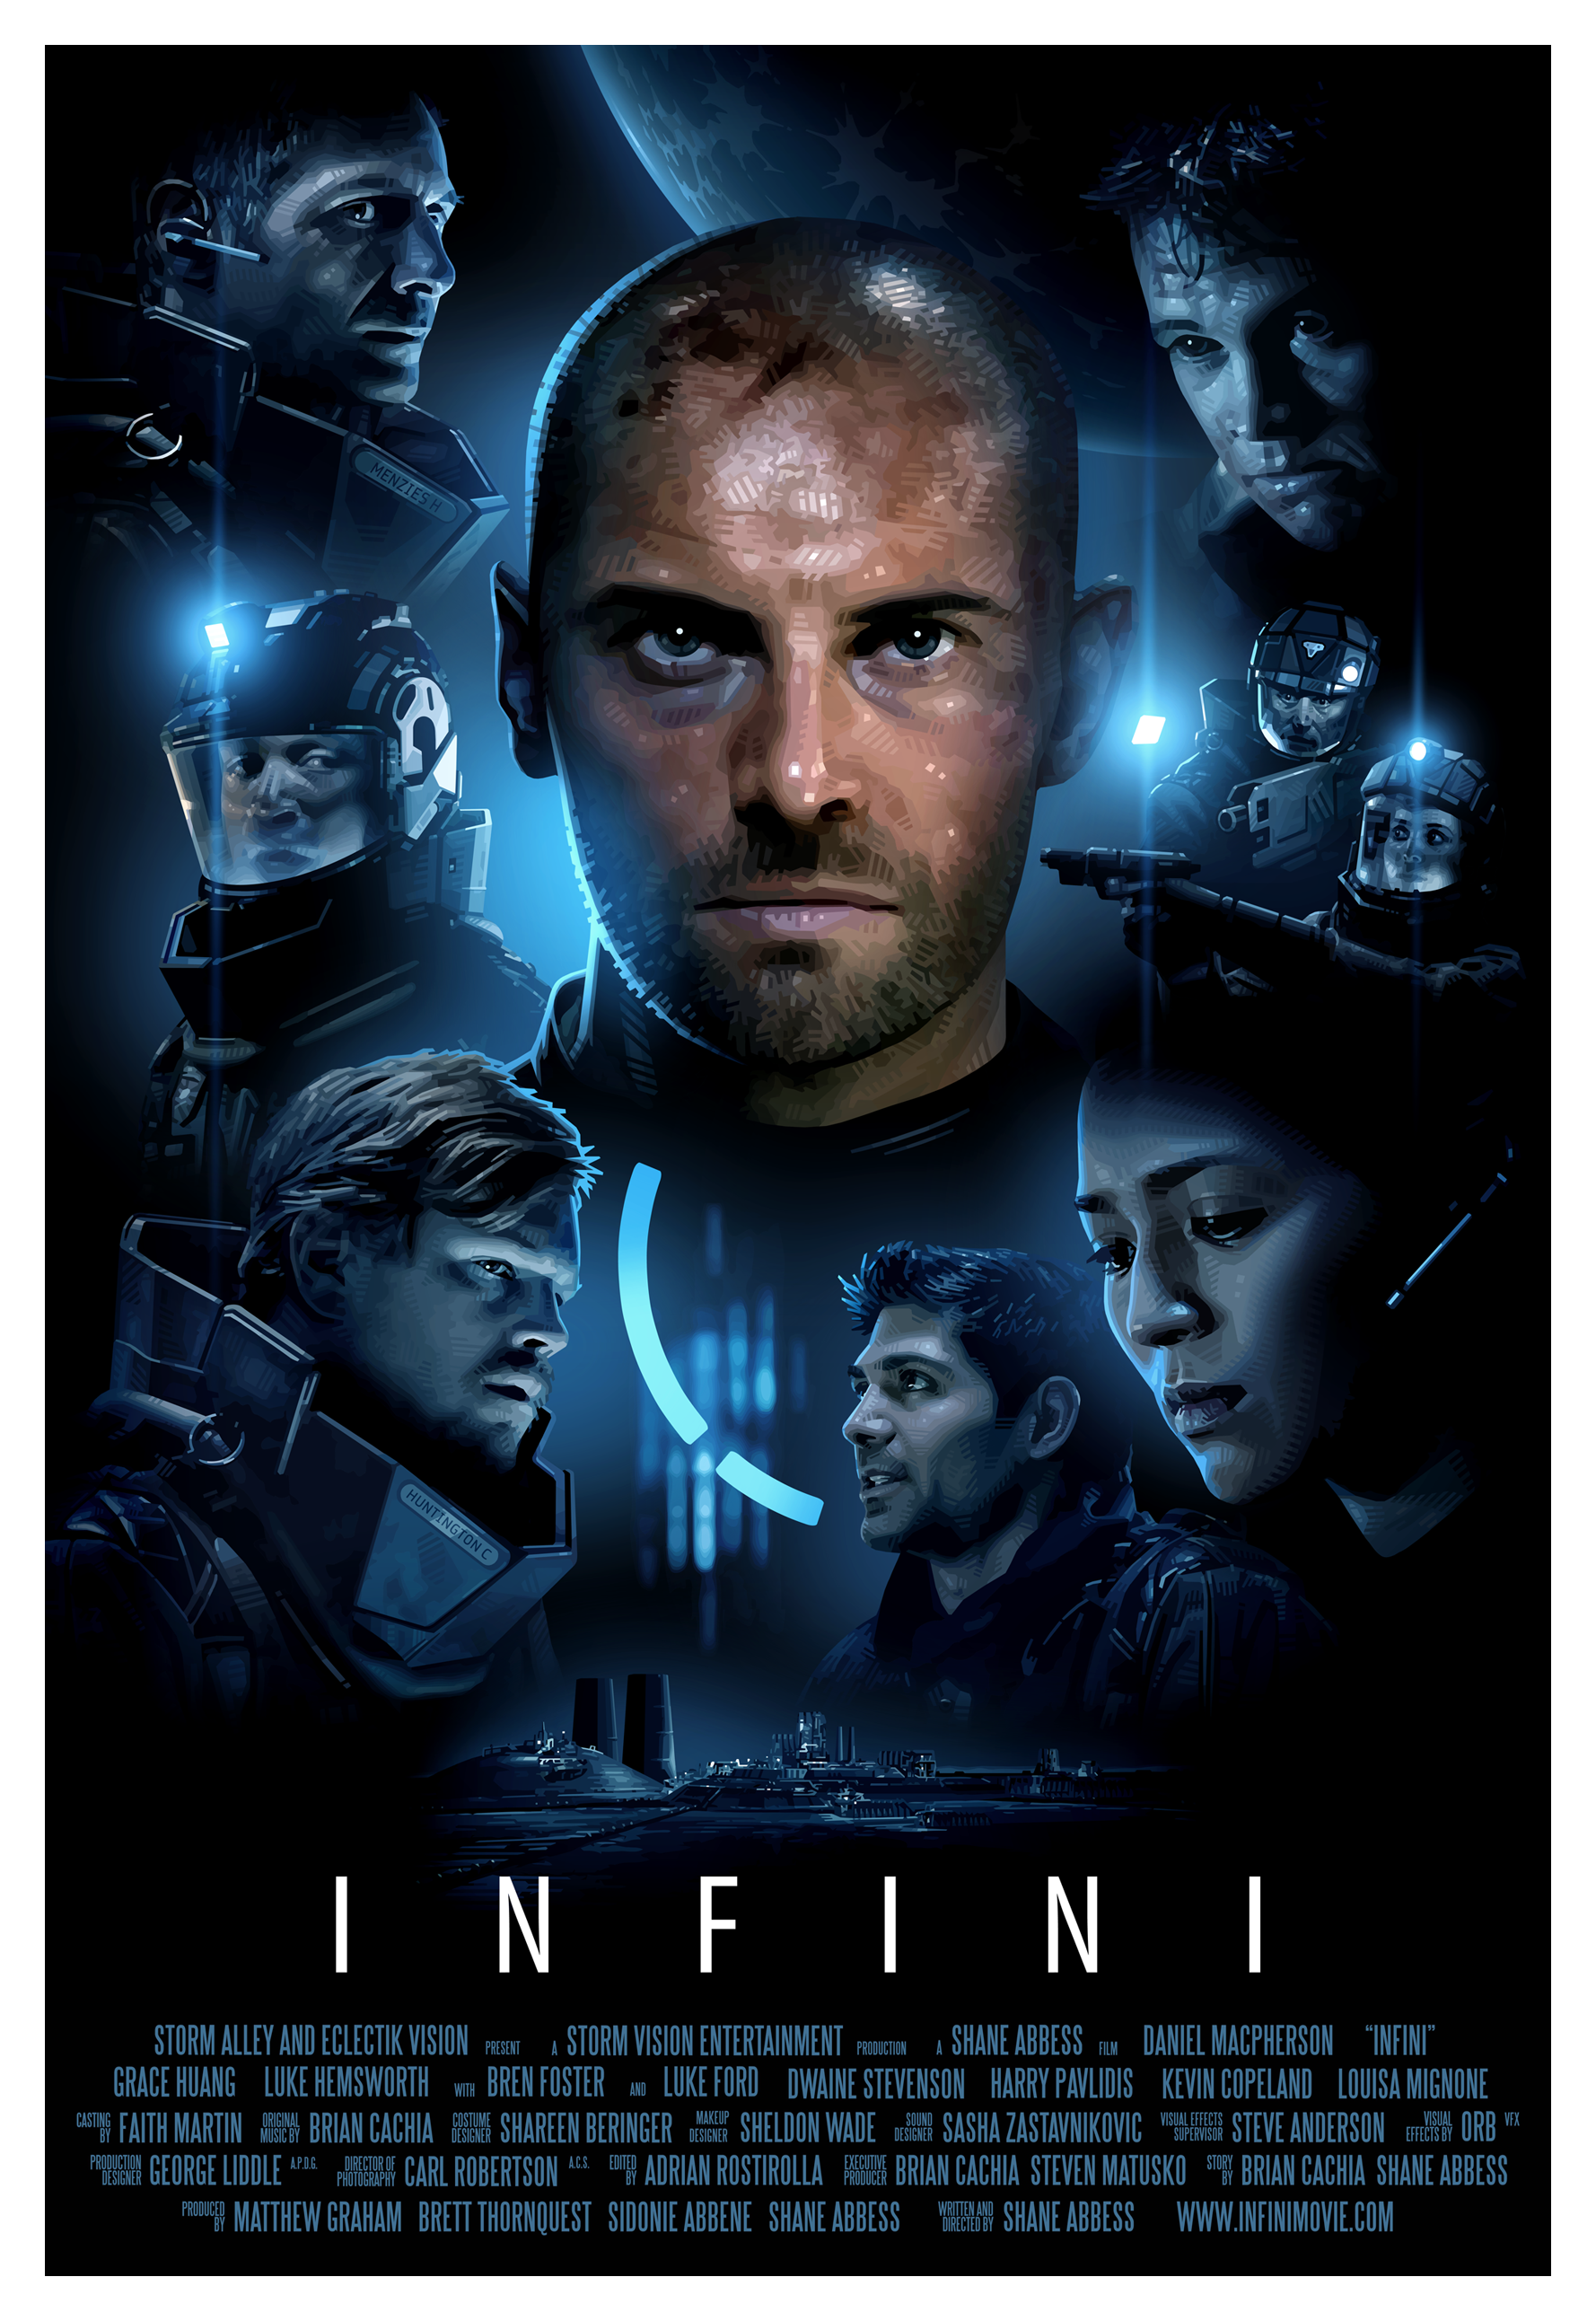 Infini film review: Alien meets The Shining